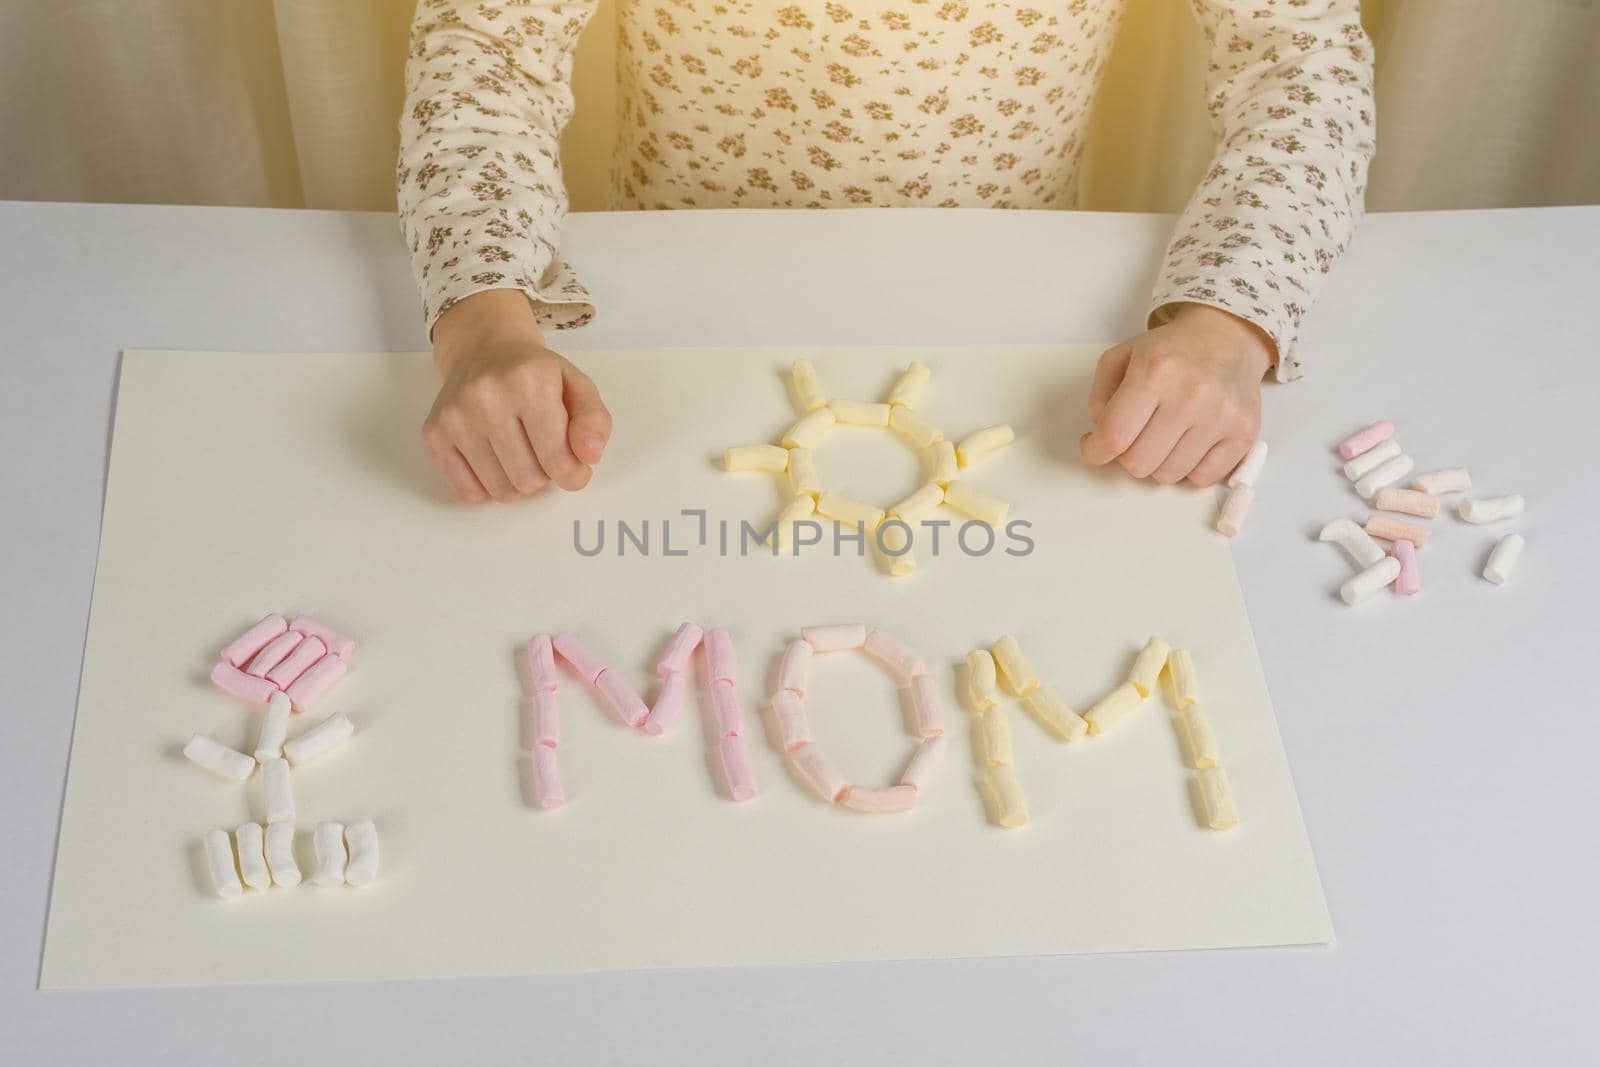 Mothers Day. A gift to the child mom, drawing an applique from marshmallow